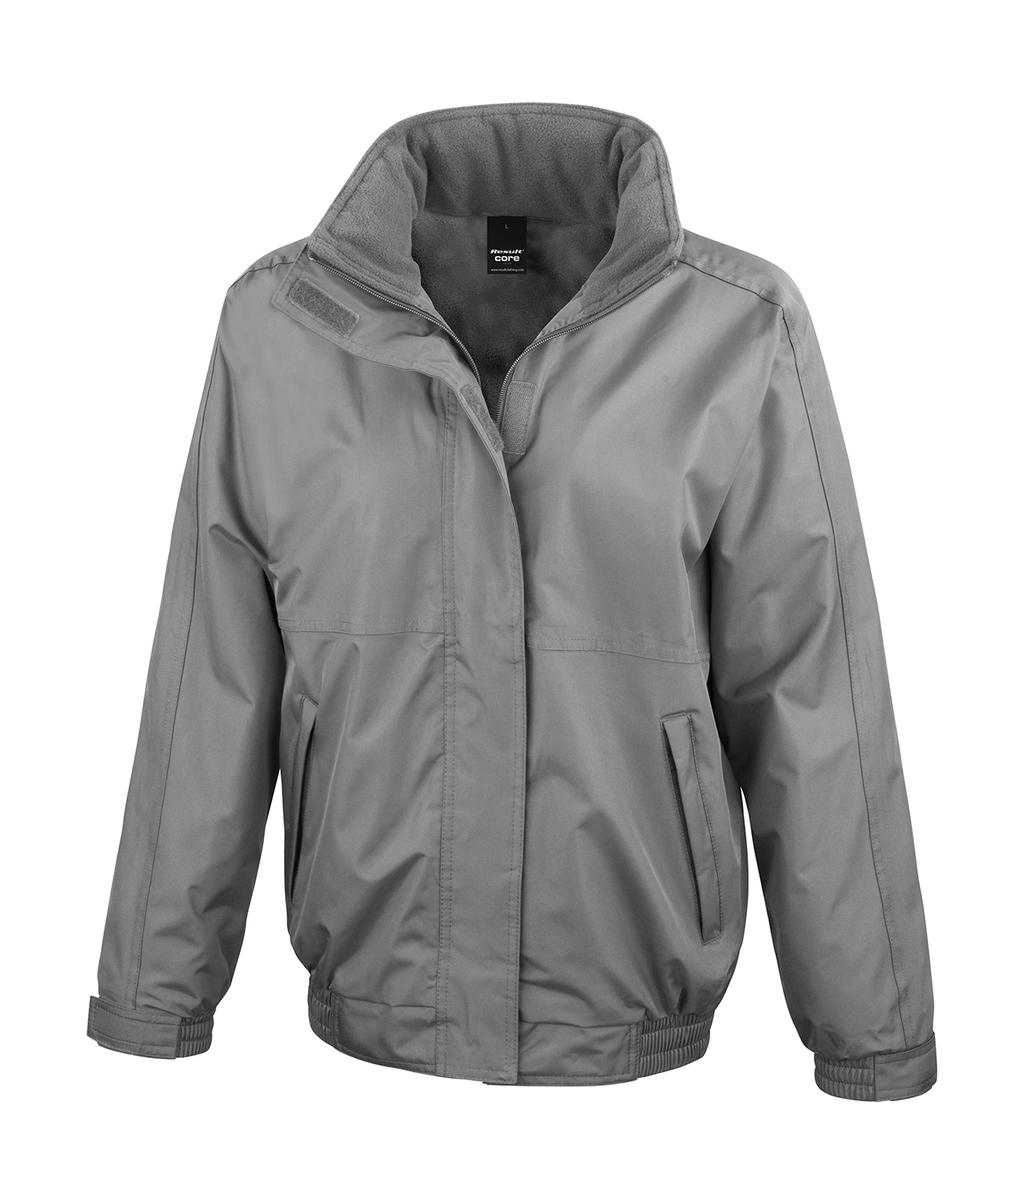  Ladies Channel Jacket in Farbe Grey